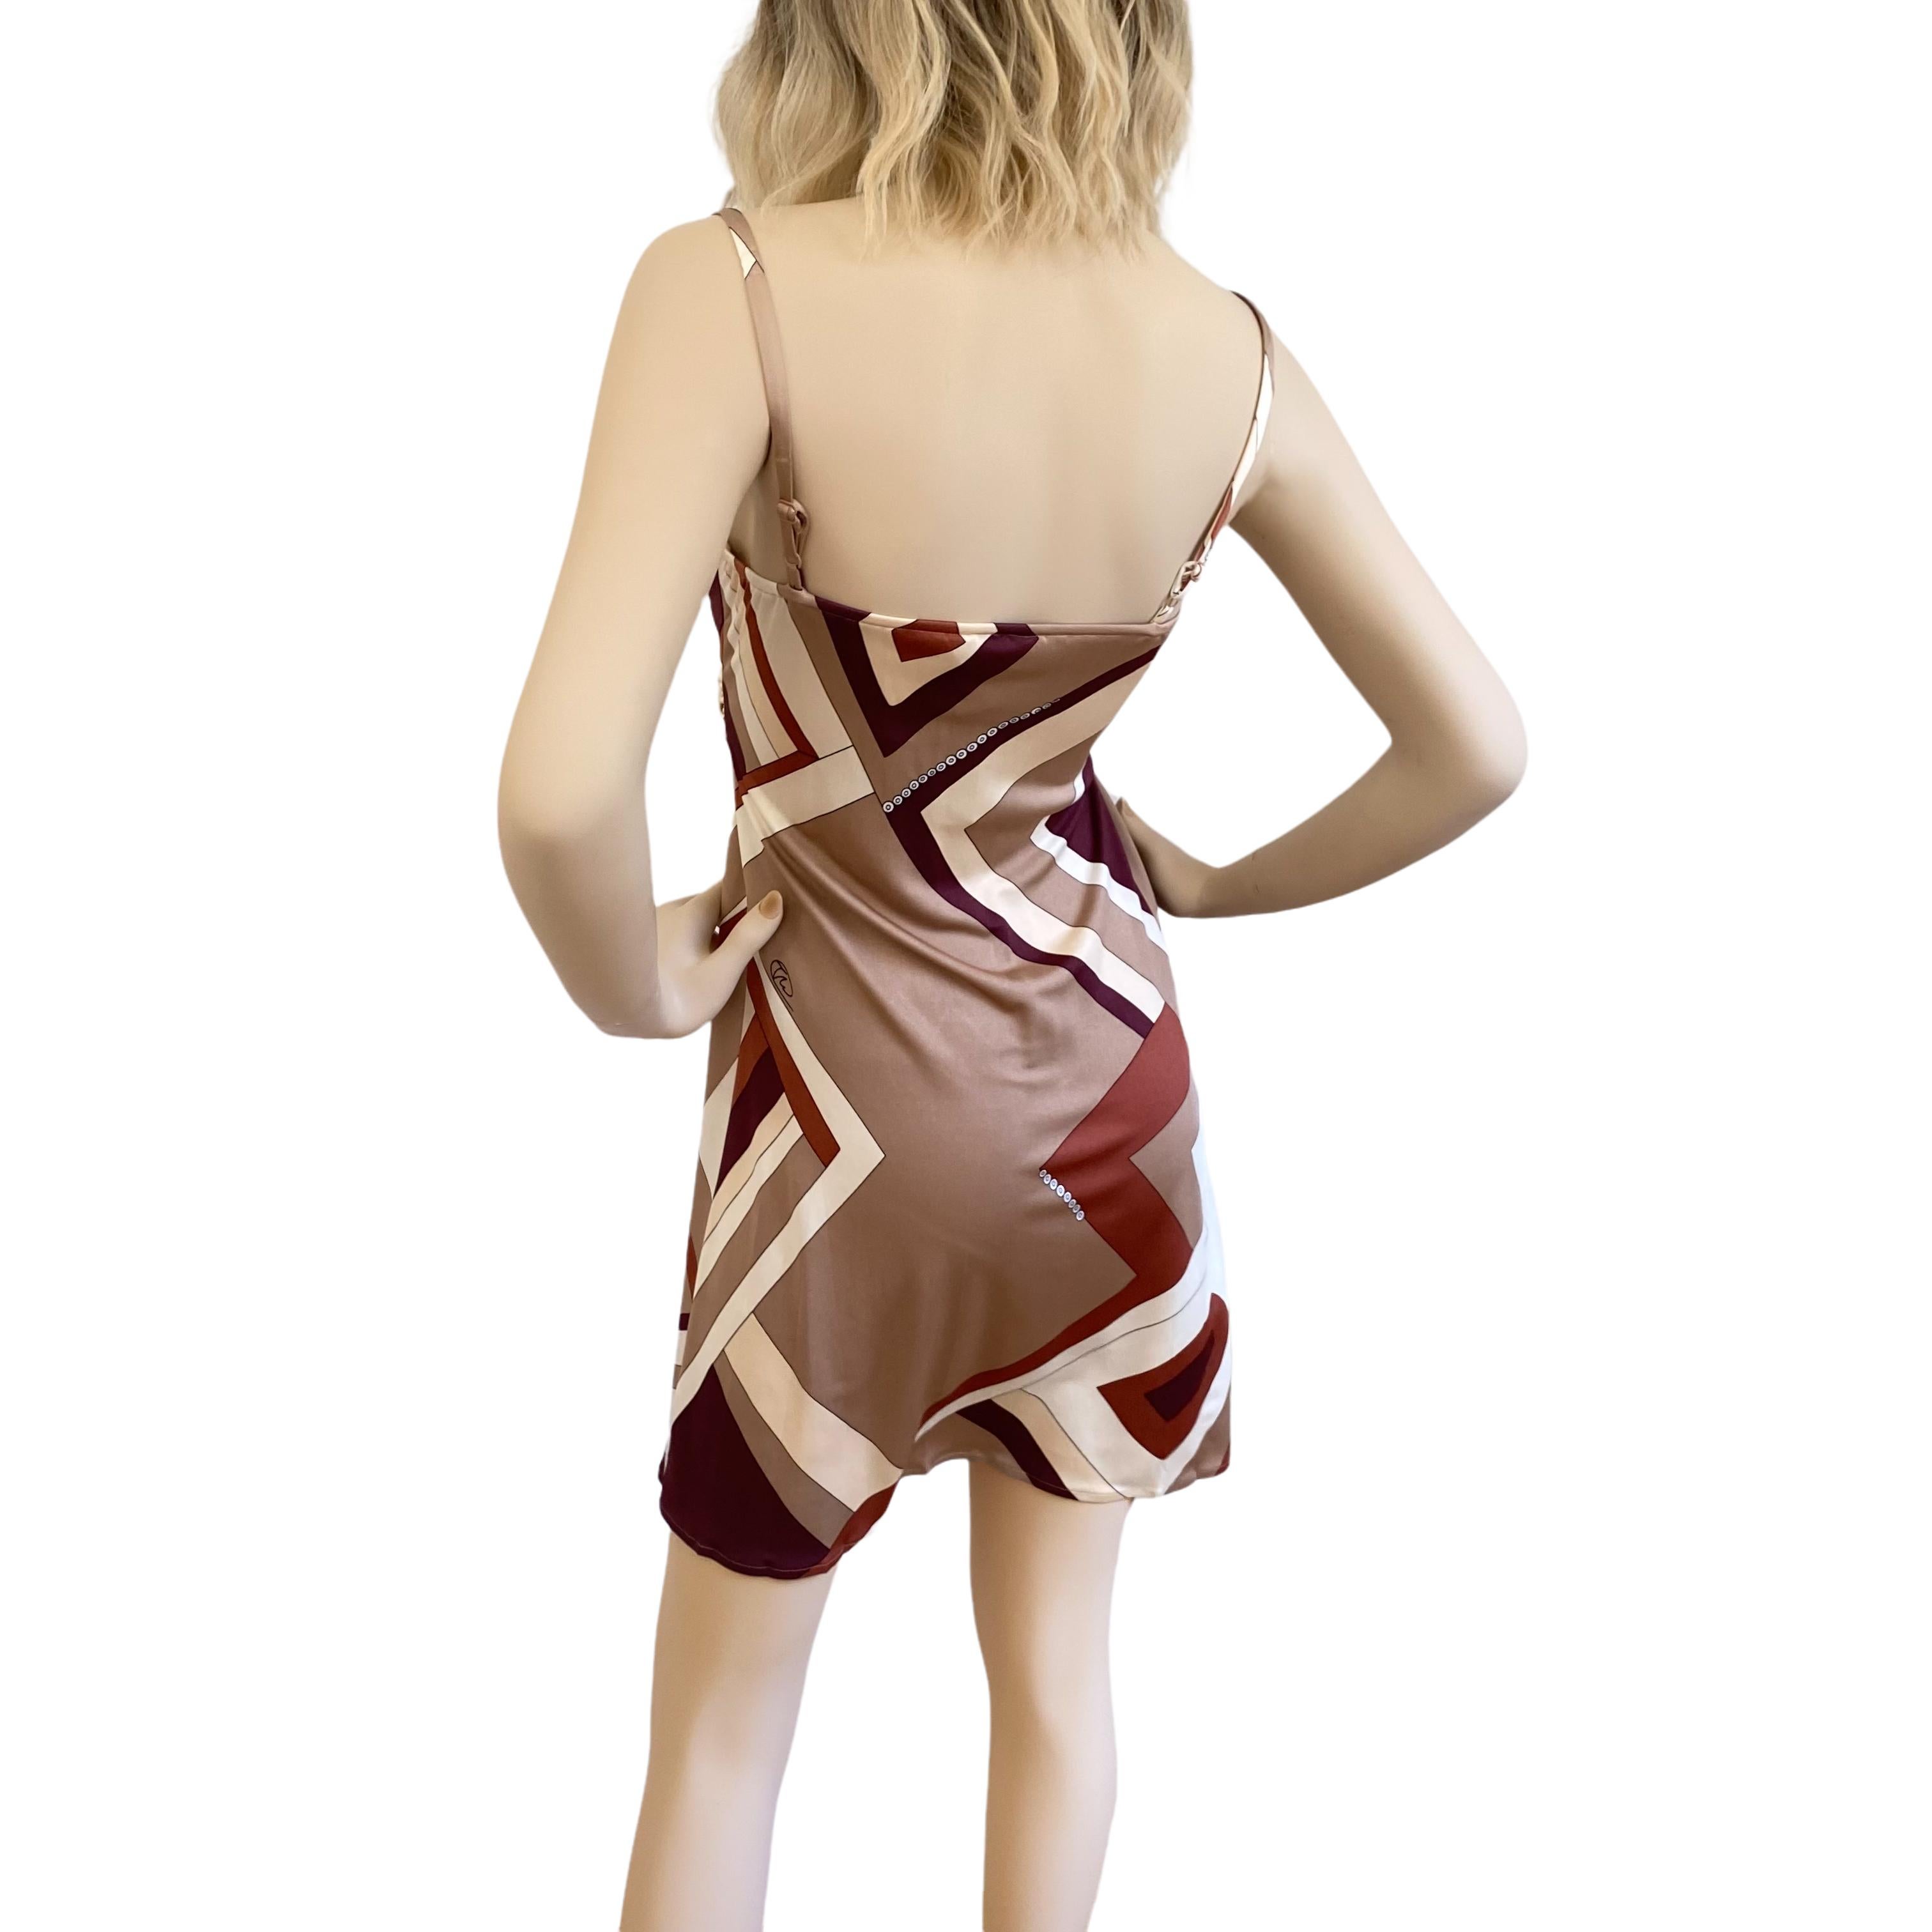 Twist front easy cami dress with adjustable shoulder straps for a perfect, flattering fit.
Featuring Flora's deco color-block print in shades of mocha / latte 
Approximately 34